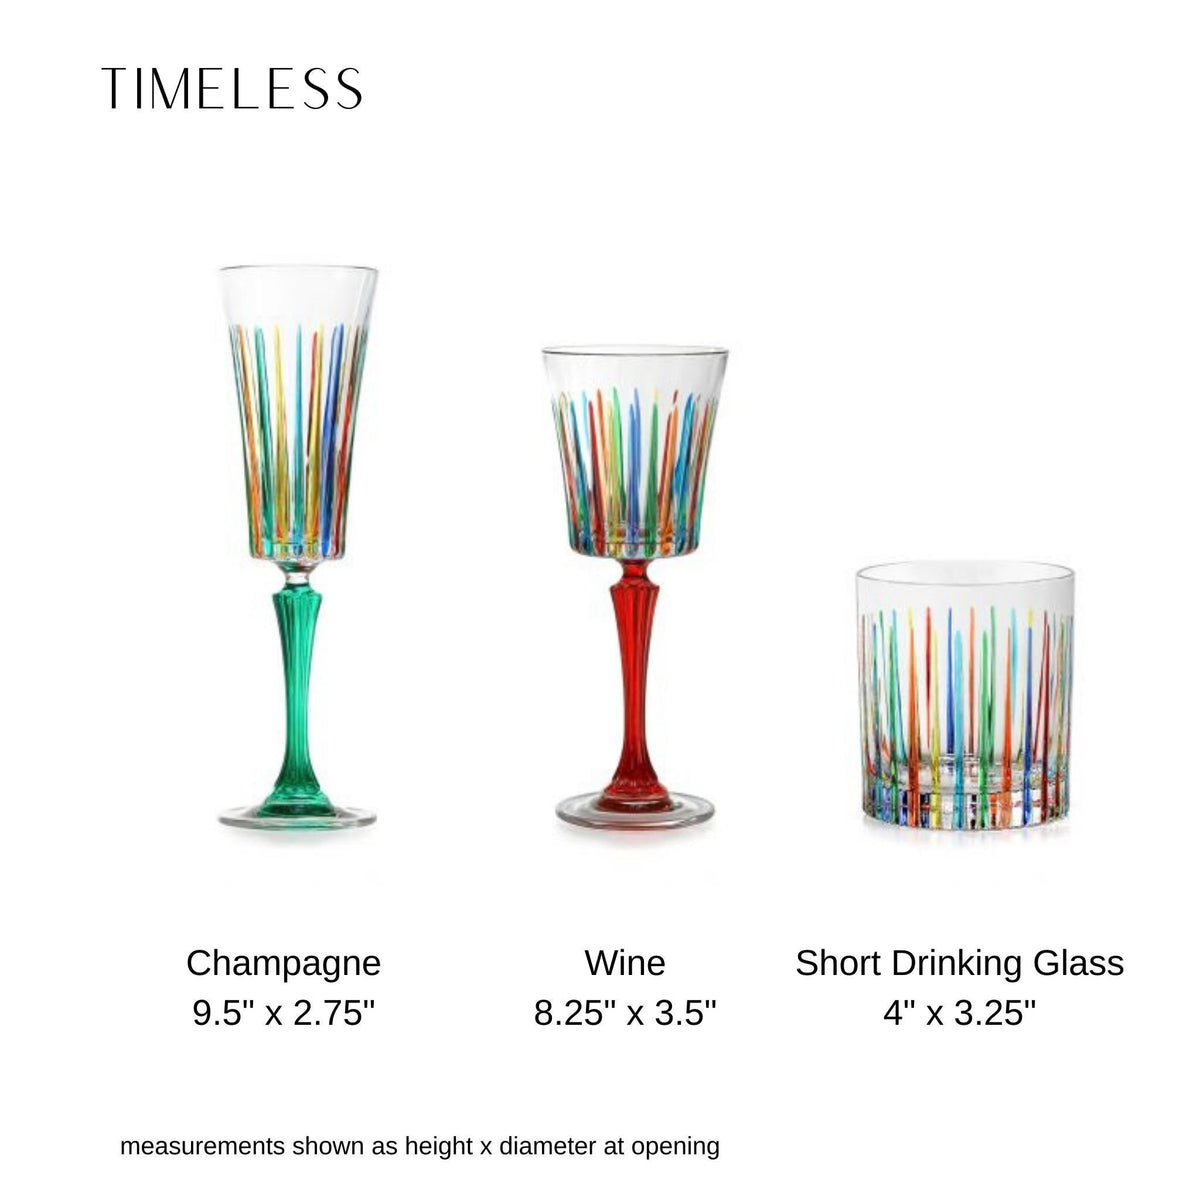 Timeless Champagne Glasses, Hand-Painted Italian Crystal - My Italian Decor